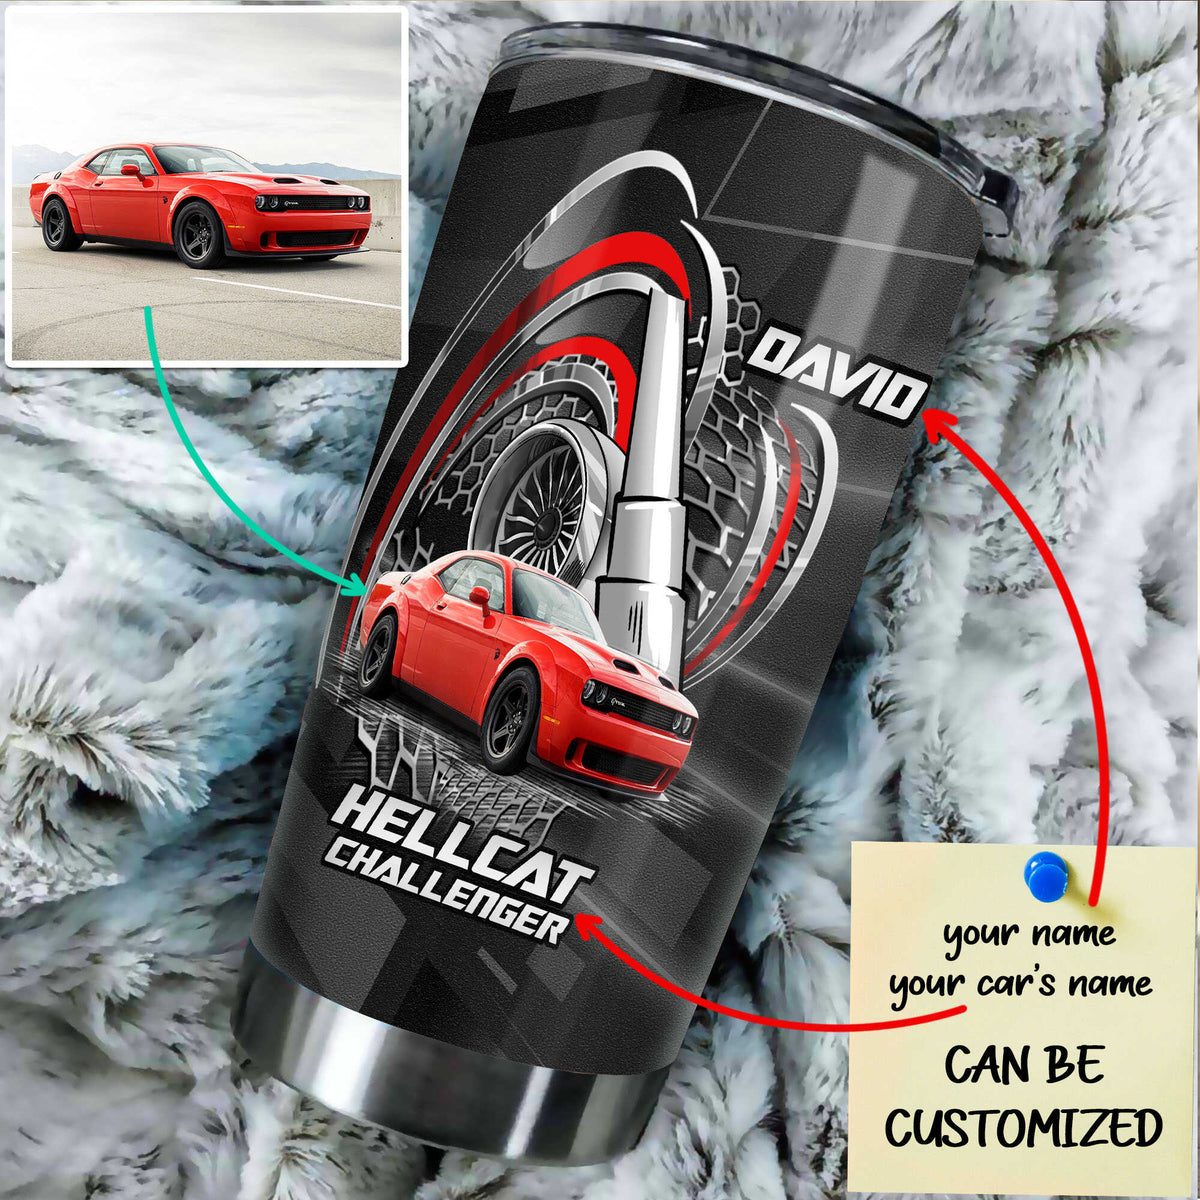 Personalized Car Tumbler - Stainless Steel Tumbler For Car Enthusiasts